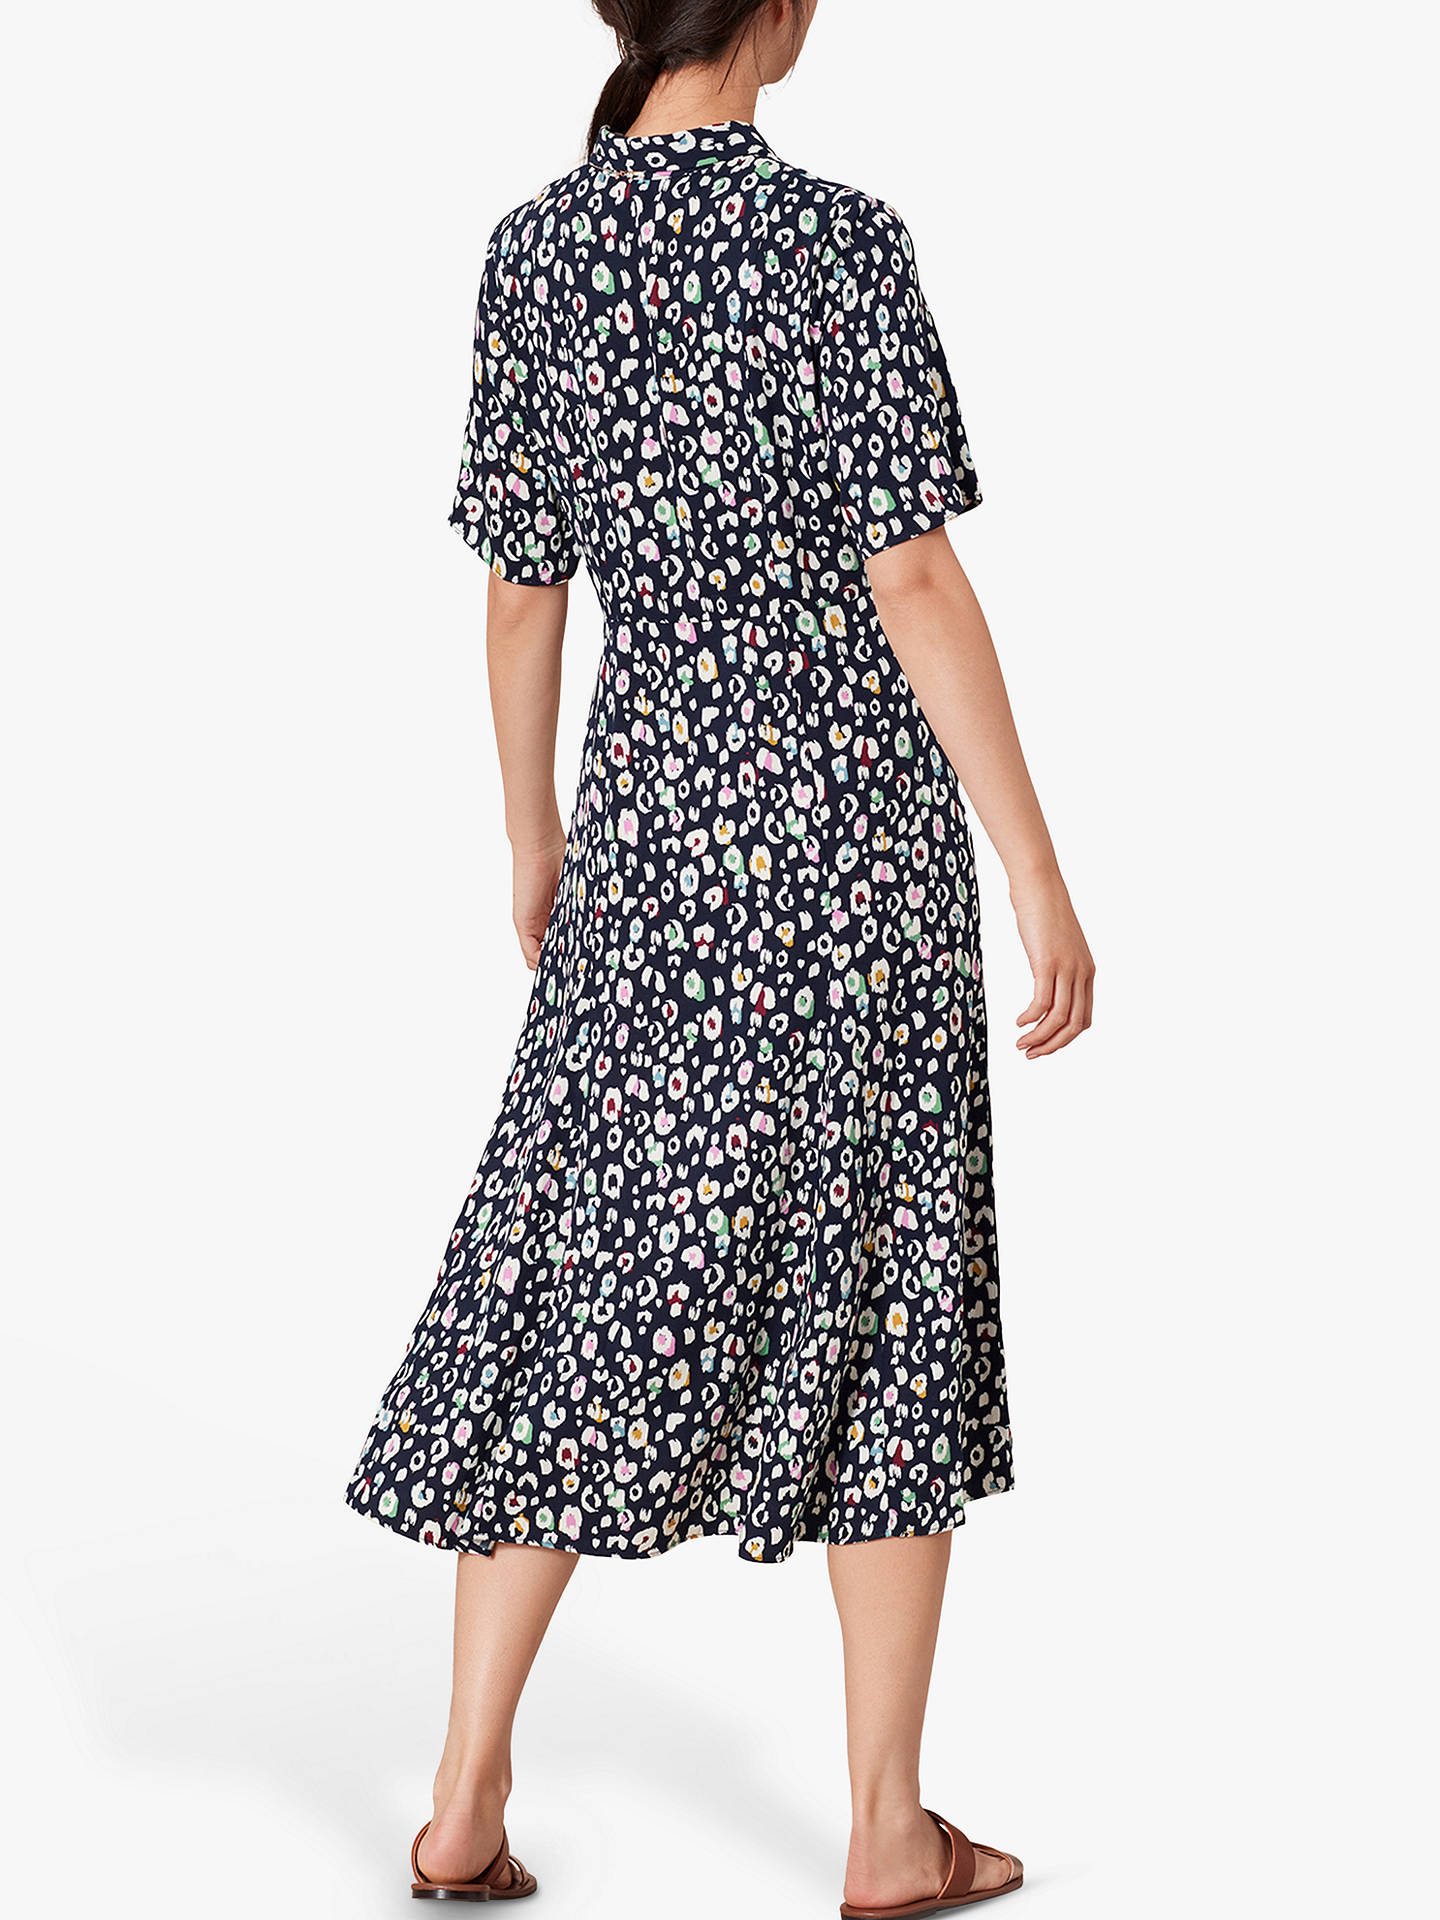 Joules Carla Maxi Dress French Navy At John Lewis Partners Images, Photos, Reviews